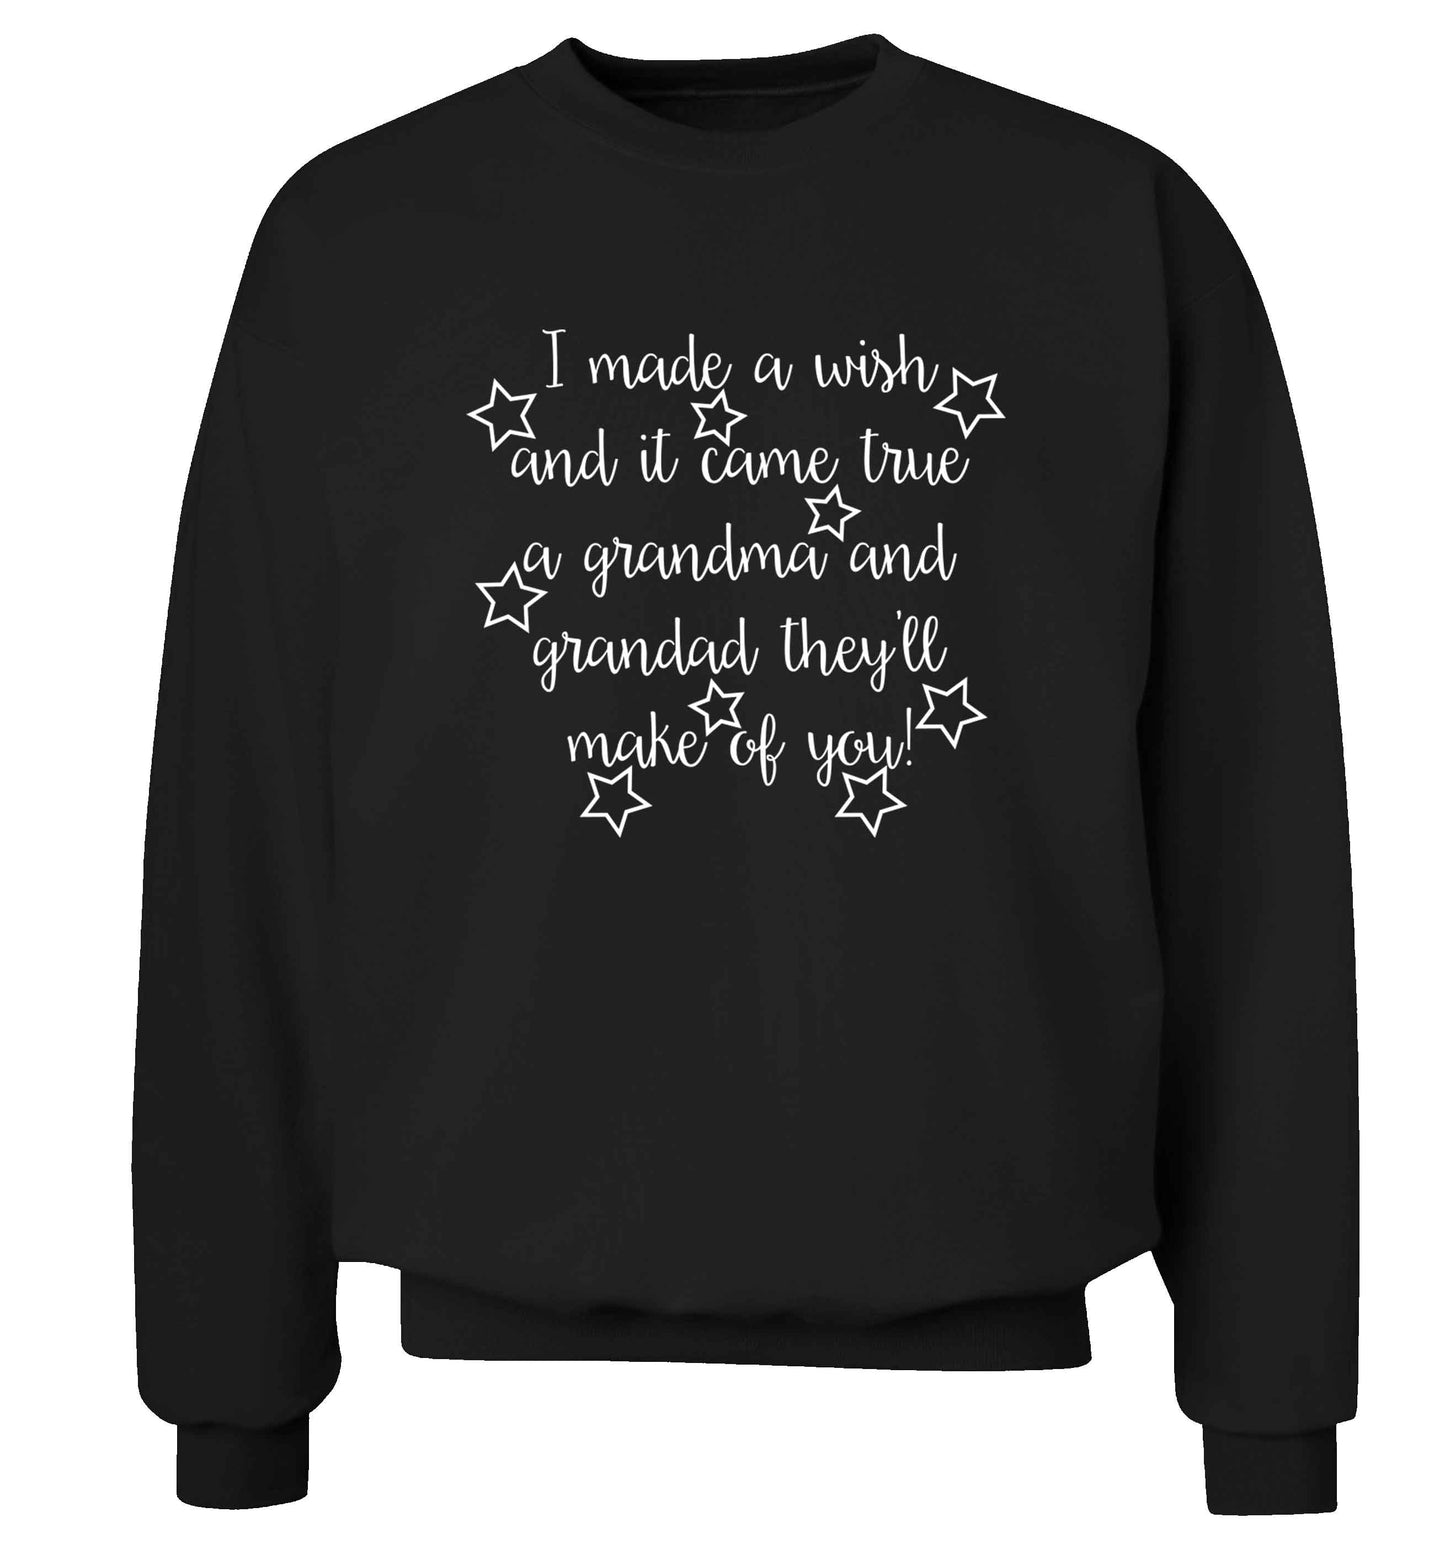 I made a wish and it came true a grandma and grandad they'll make of you! Adult's unisex black Sweater 2XL